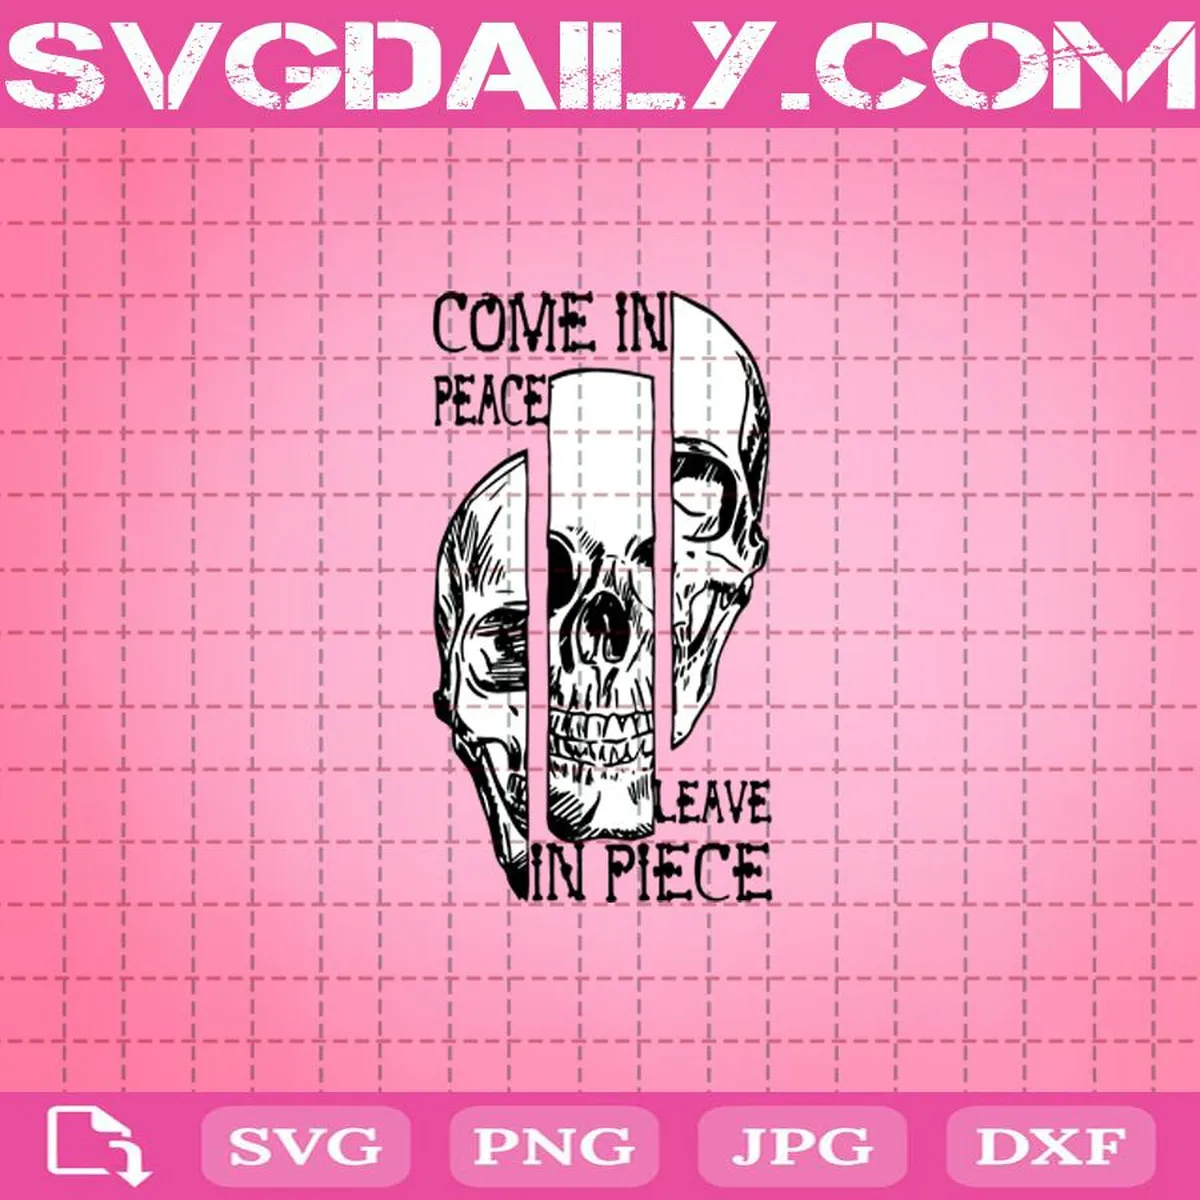 Come In Peace Leave In Piece Svg, Halloween Svg, Skull Svg, Peace Svg, Horror Svg, Halloween Silhouette Svg Files